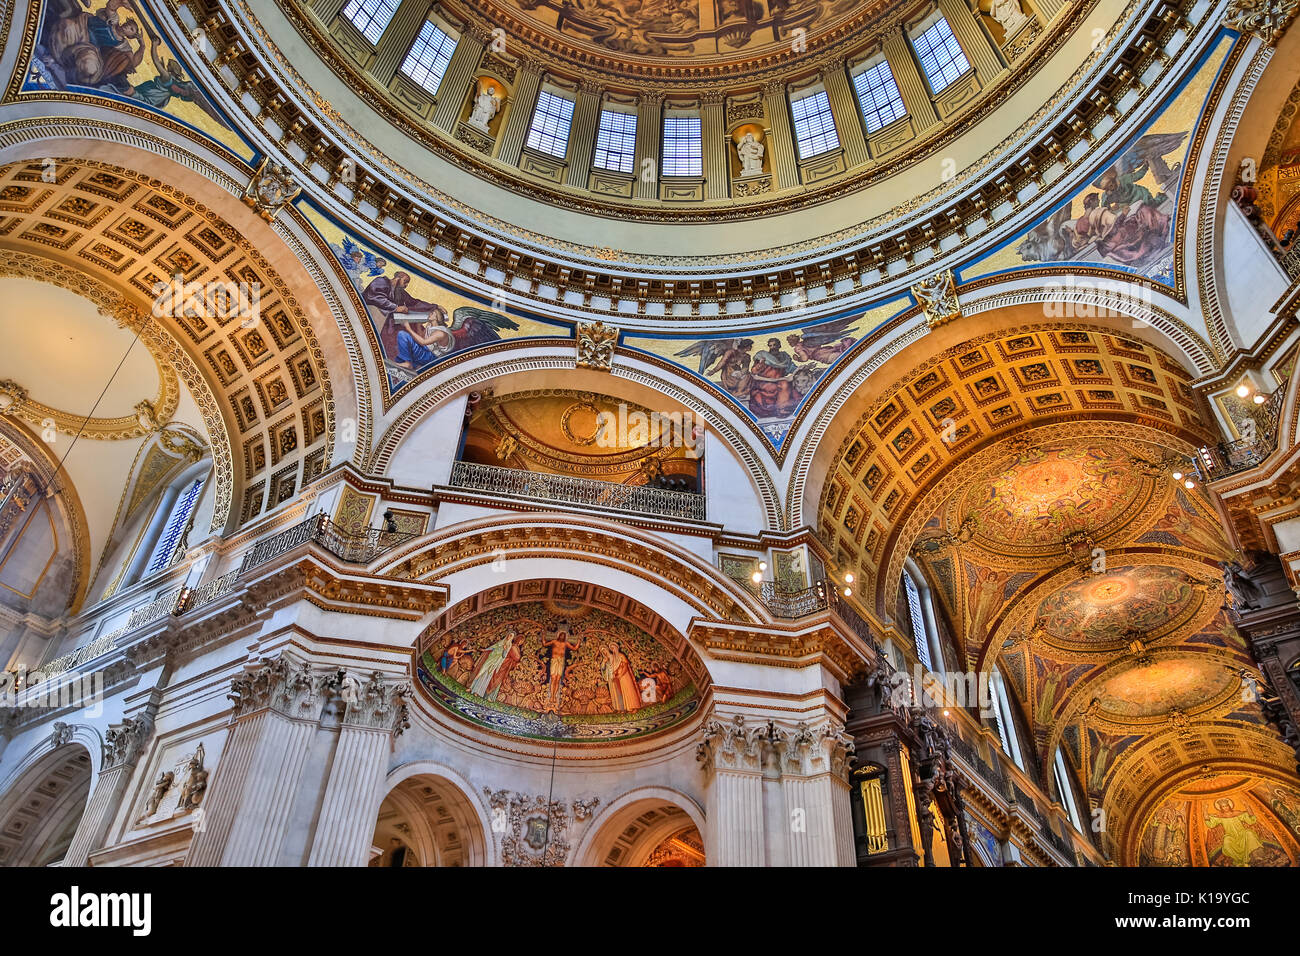 St Paul's Cathedral interior, view up to the ceiling and wall paintings, carvings and gilded decorations of the inner dome, London UK Stock Photo